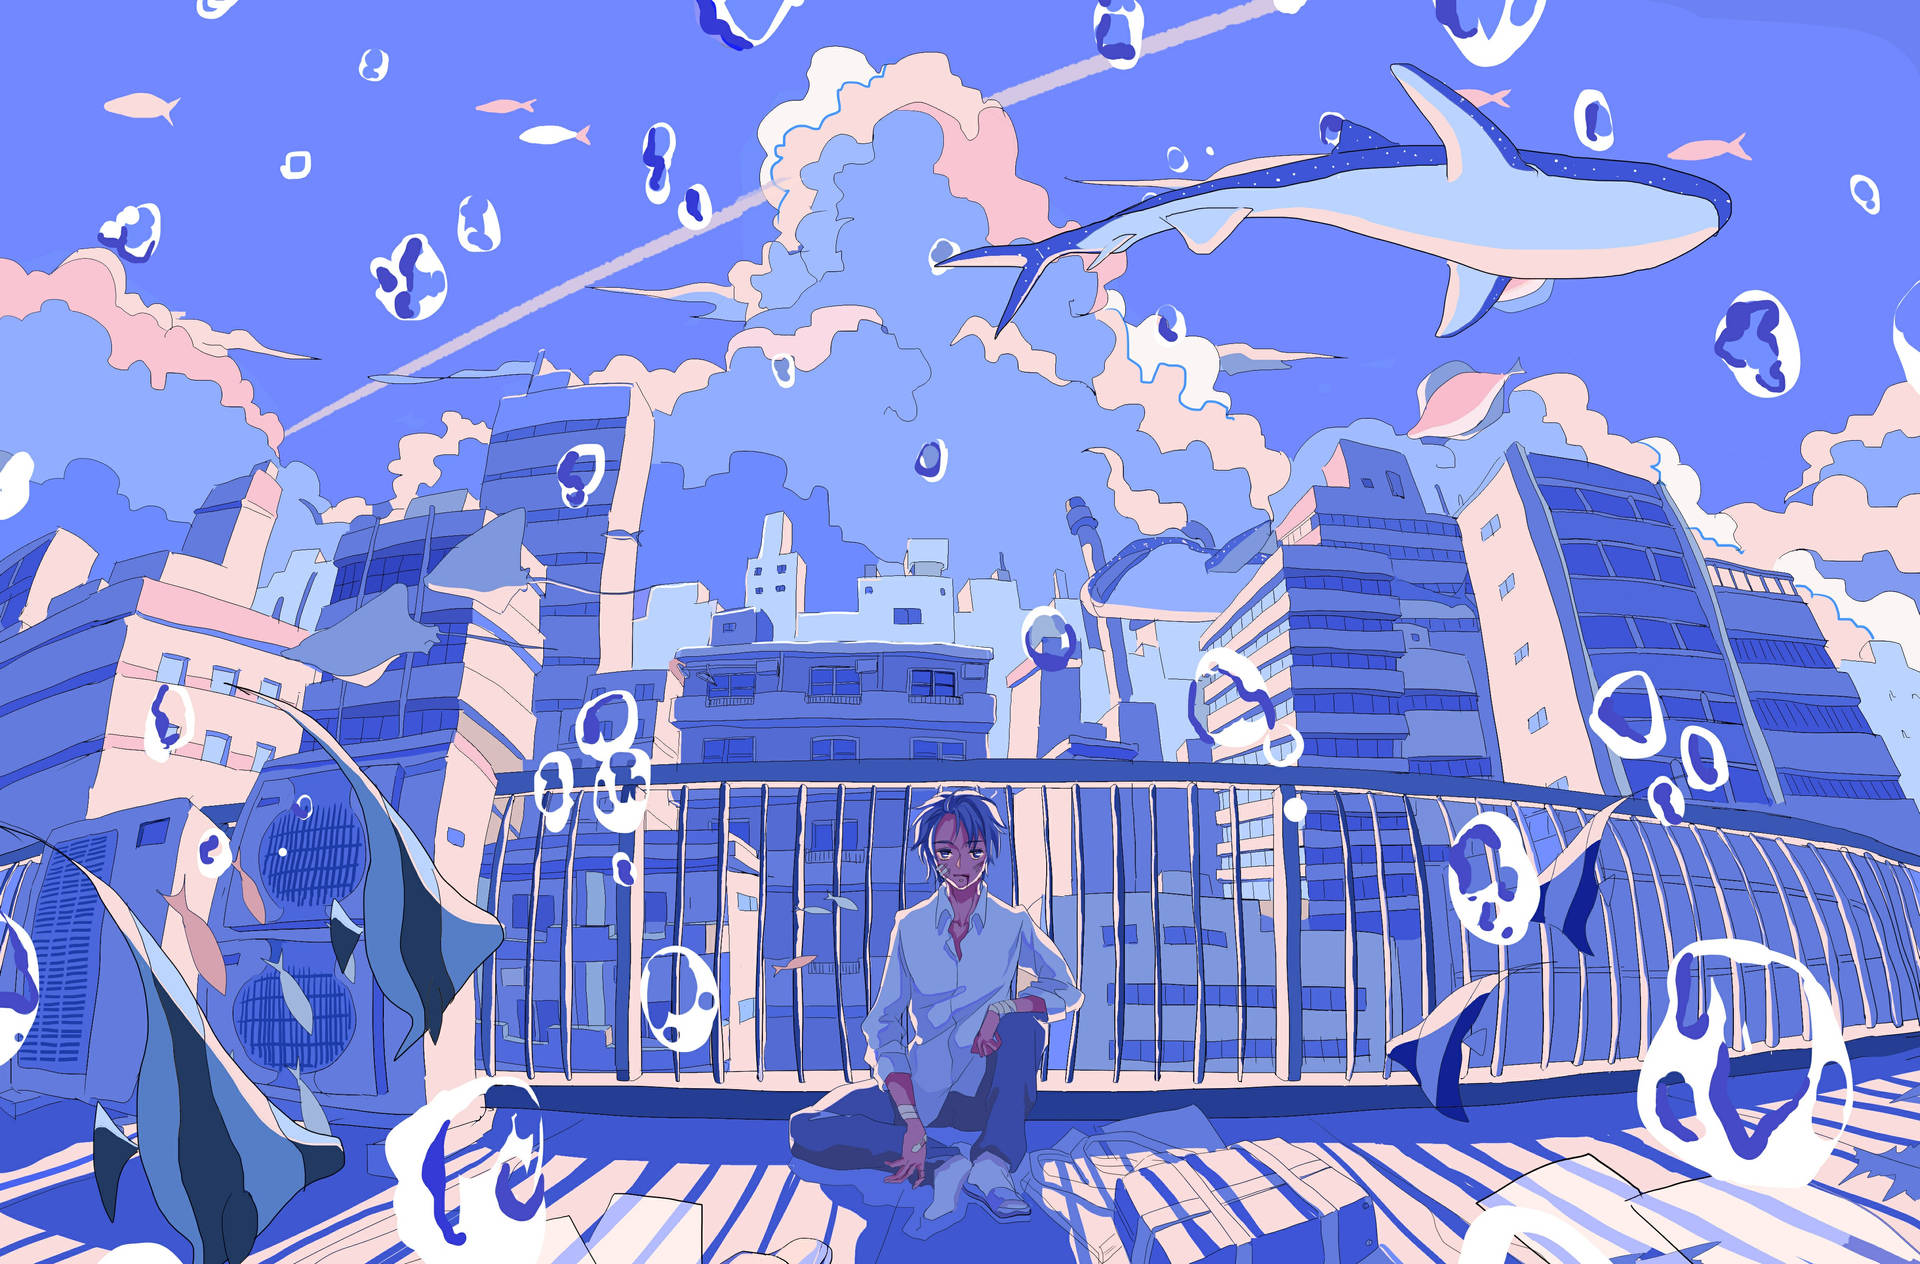 Aesthetic Anime Desktop Man On Railing With Flying Fish Background